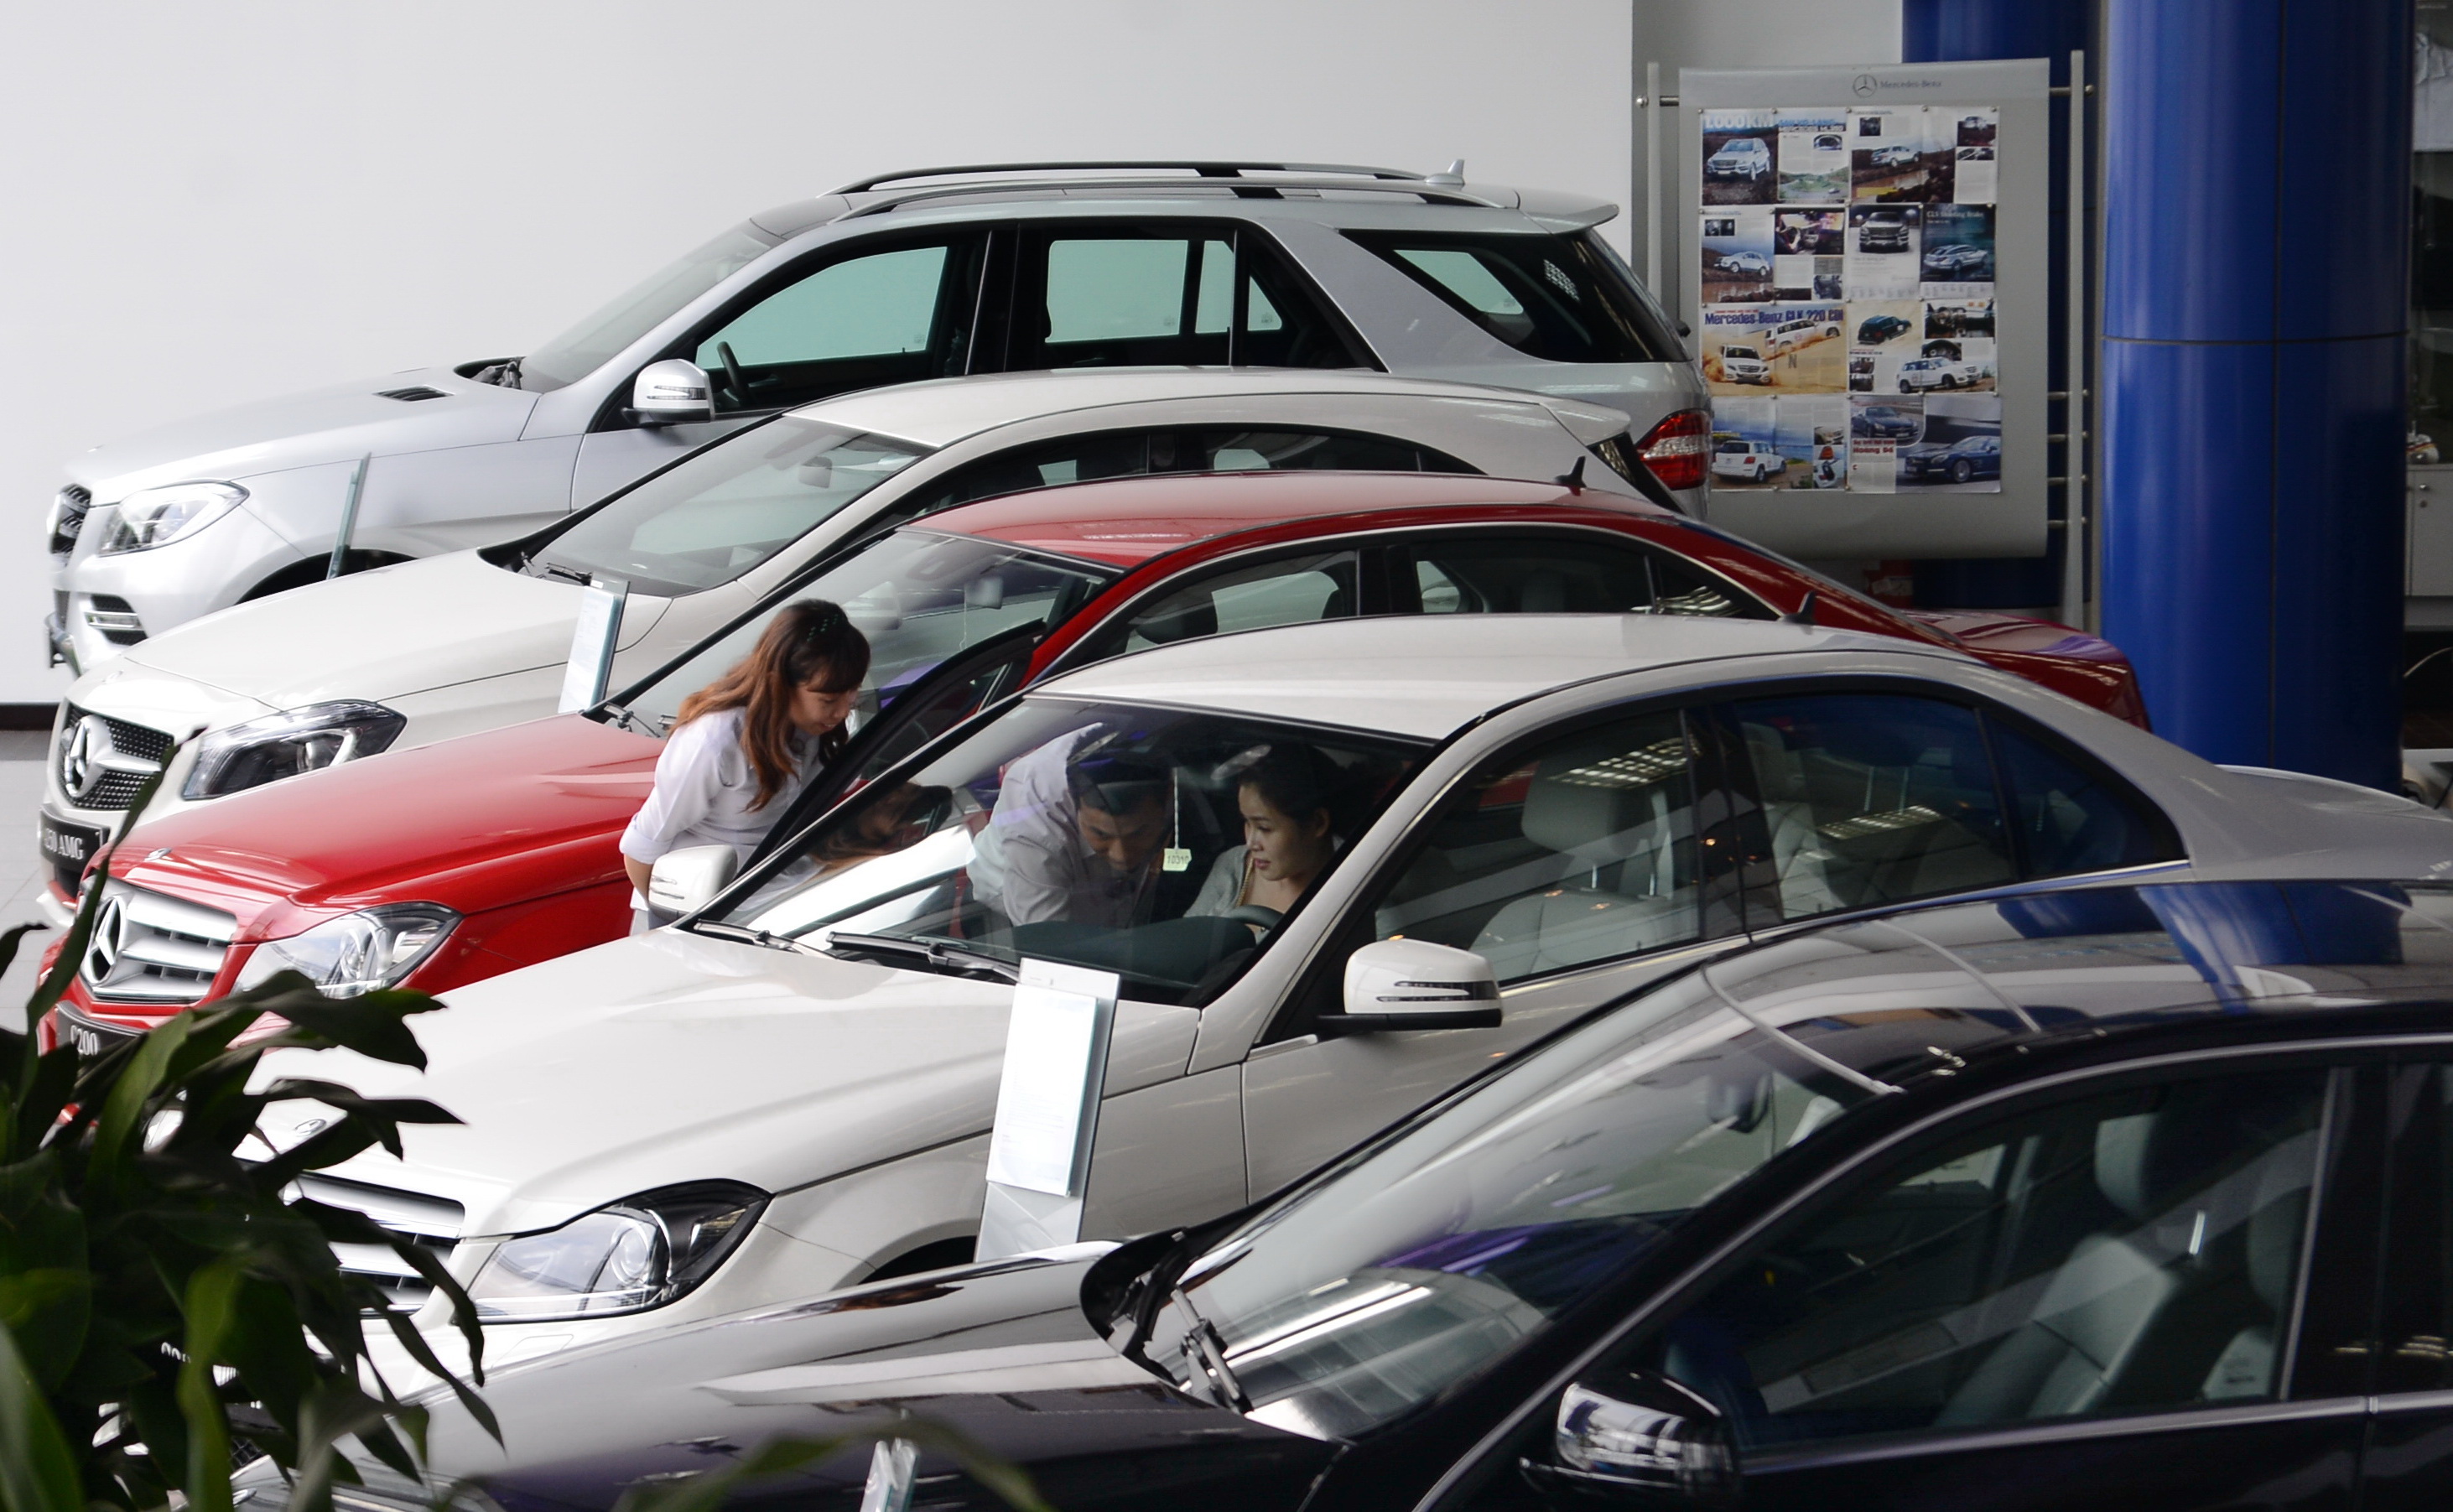 Vietnam may halve prices of small imported cars from 2019